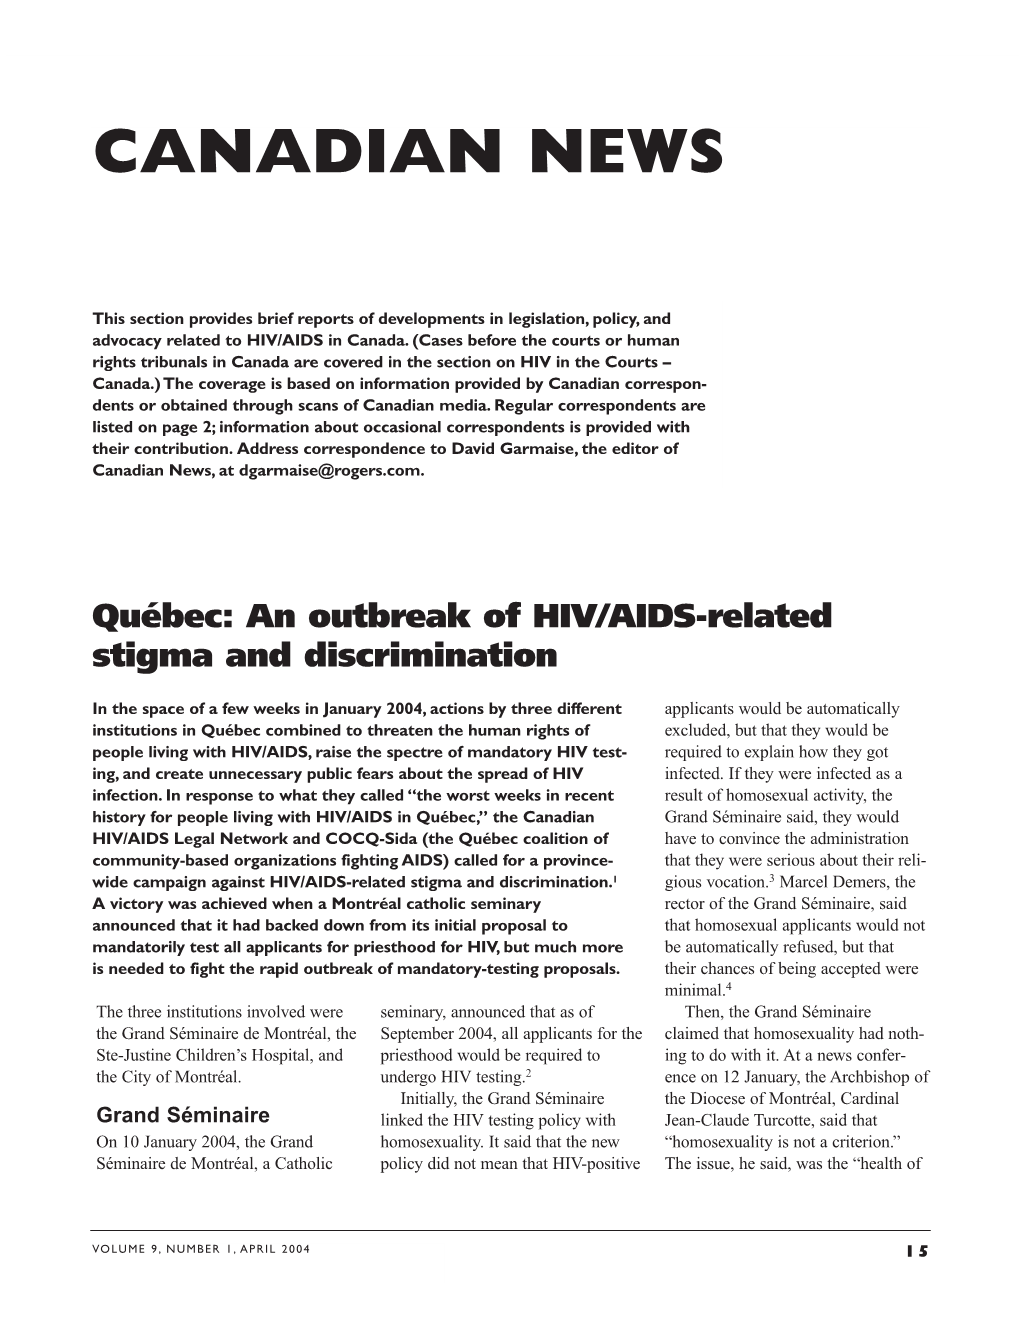 Québec: an Outbreak of HIV/AIDS-Related Stigma and Discrimination